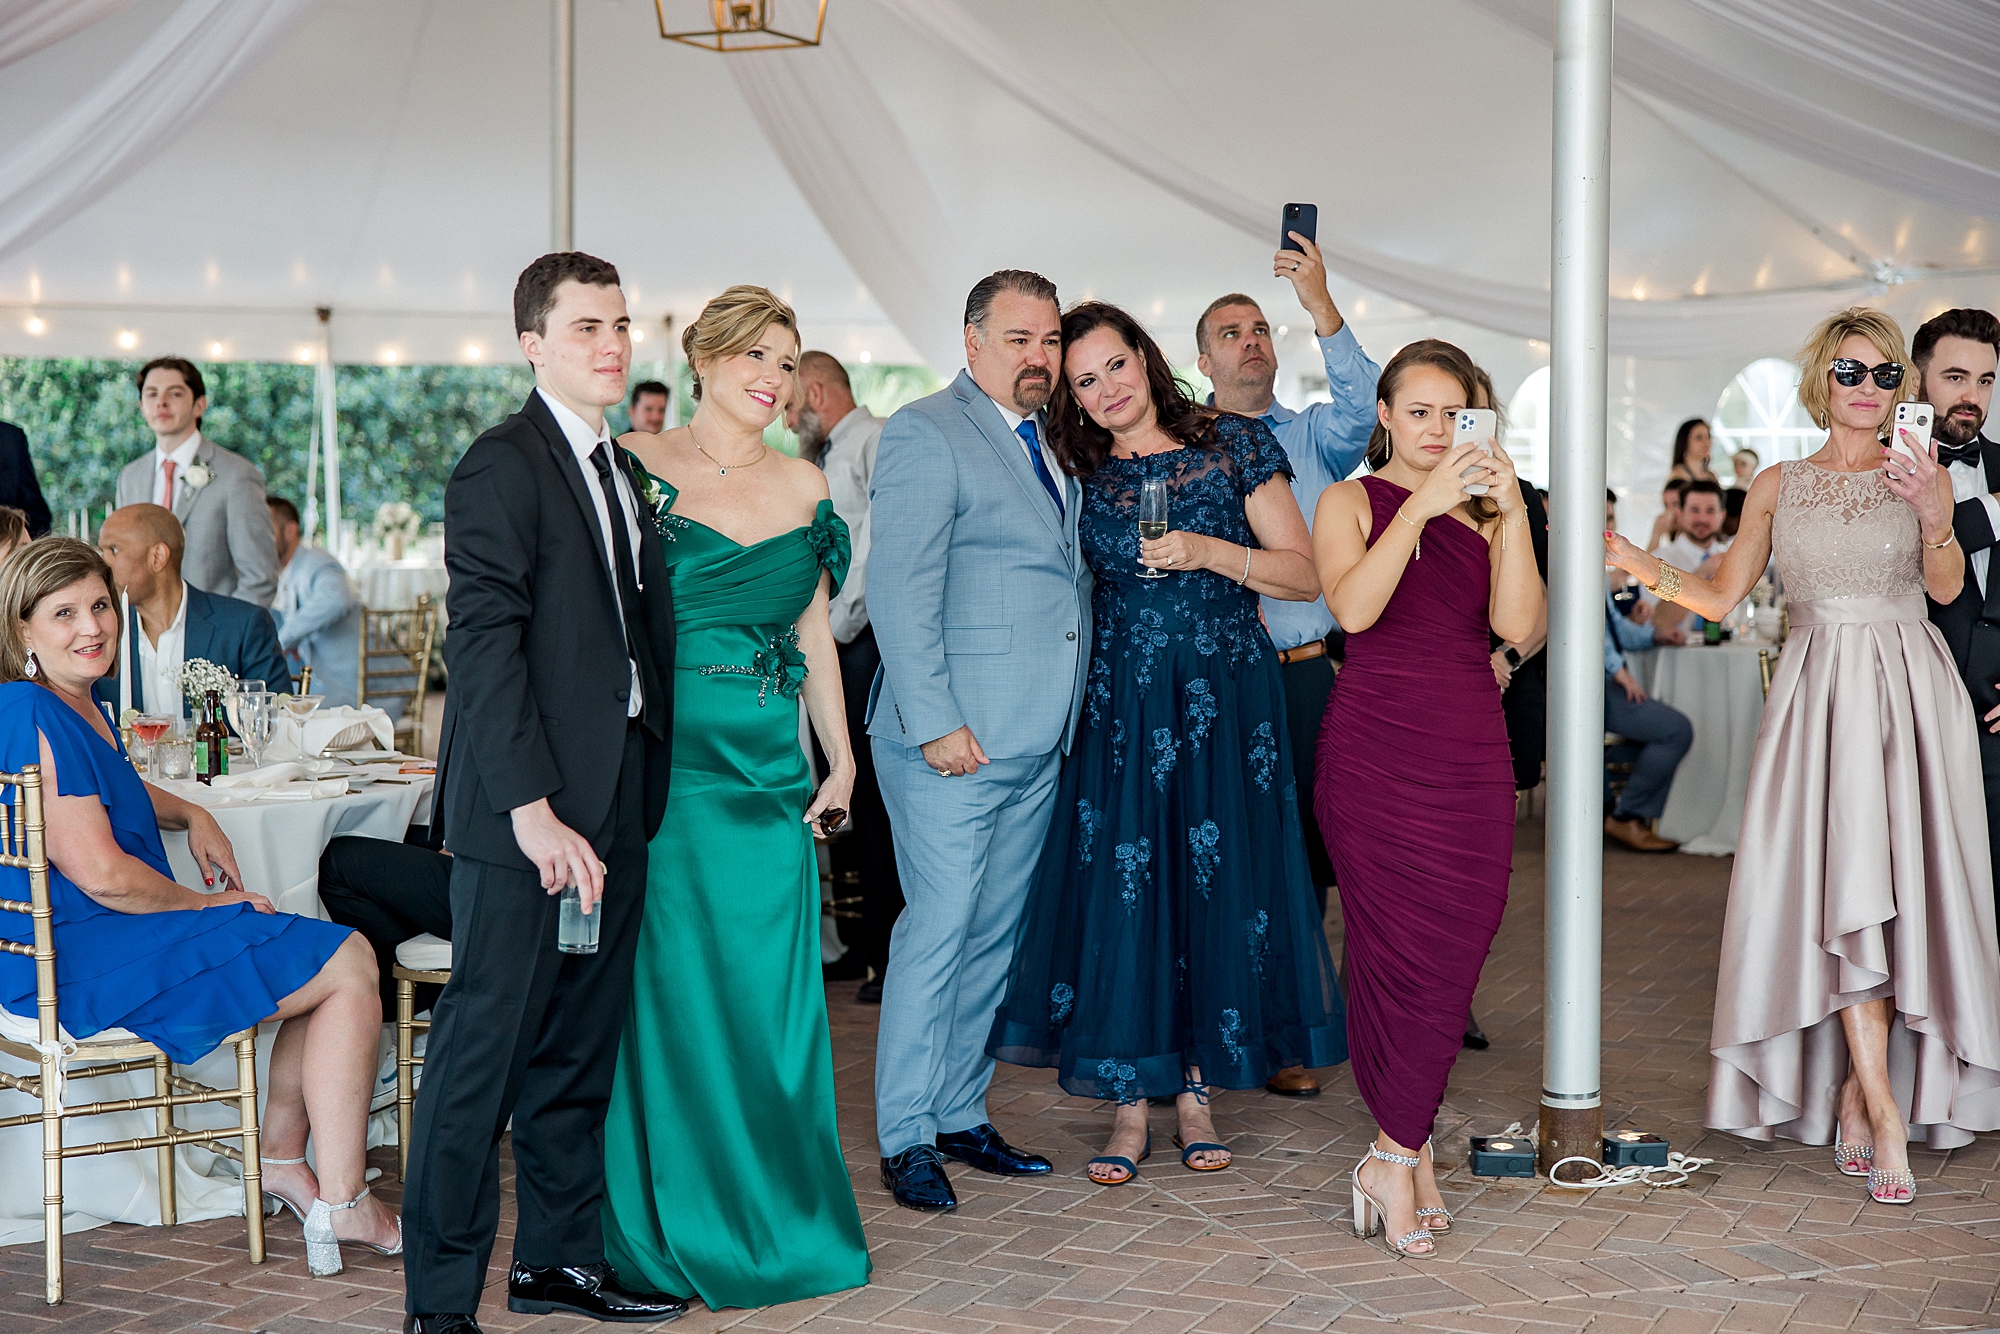 wedding guests take pictures of newlyweds dancing